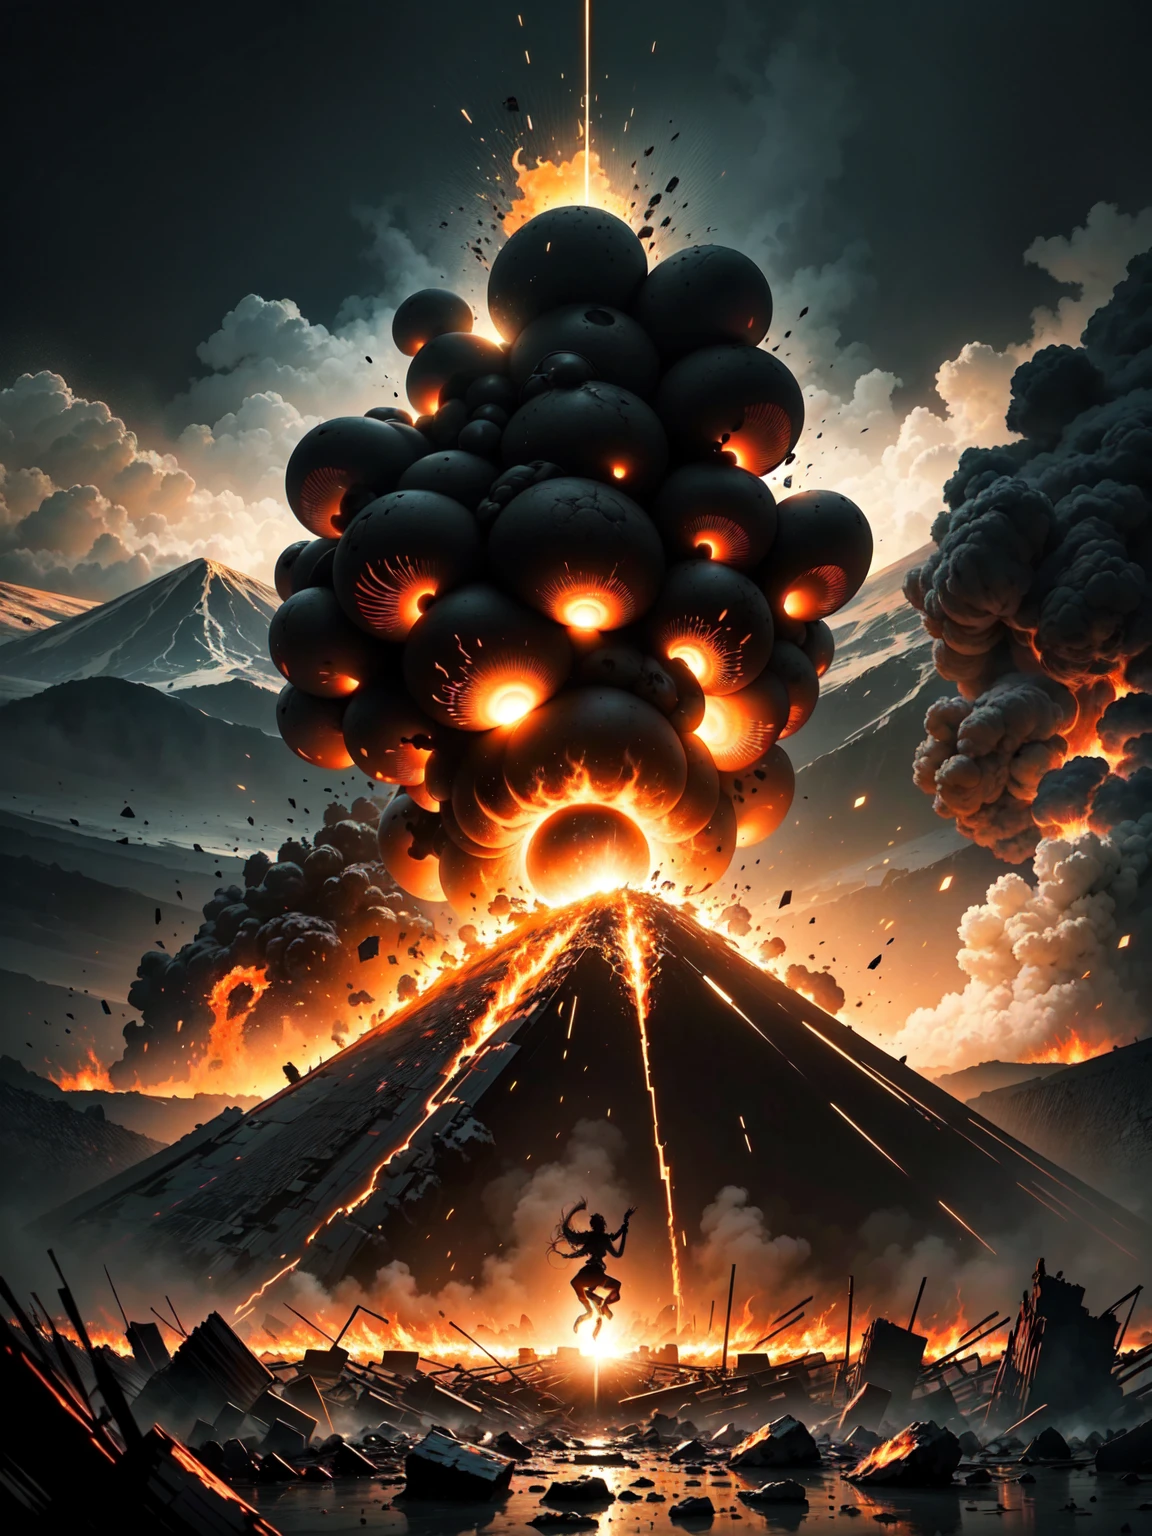 (high quality:1.2),demonic creature emerging from a volcano, an awe-inspiring image, destruction, apocalyptic, HD 4k,8k, masterpiece, ultra-detailed, hyper-realistic, lava melting everything, intense heat, glowing embers, dark and ominous atmosphere, billowing black smoke, molten rocks flying in the air, fiery explosions, crumbling buildings, devastated landscape, surreal and terrifying, vibrant and vivid colors, dramatic lighting, sparks and flames dancing around the creature, the ground cracking and splitting, chaos and despair, a haunting masterpiece in high definition.